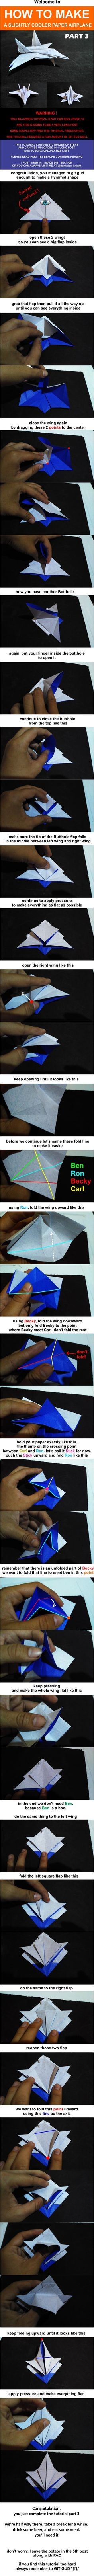 Papercraft iPhone 21 Best Paper Plane Images On Pinterest